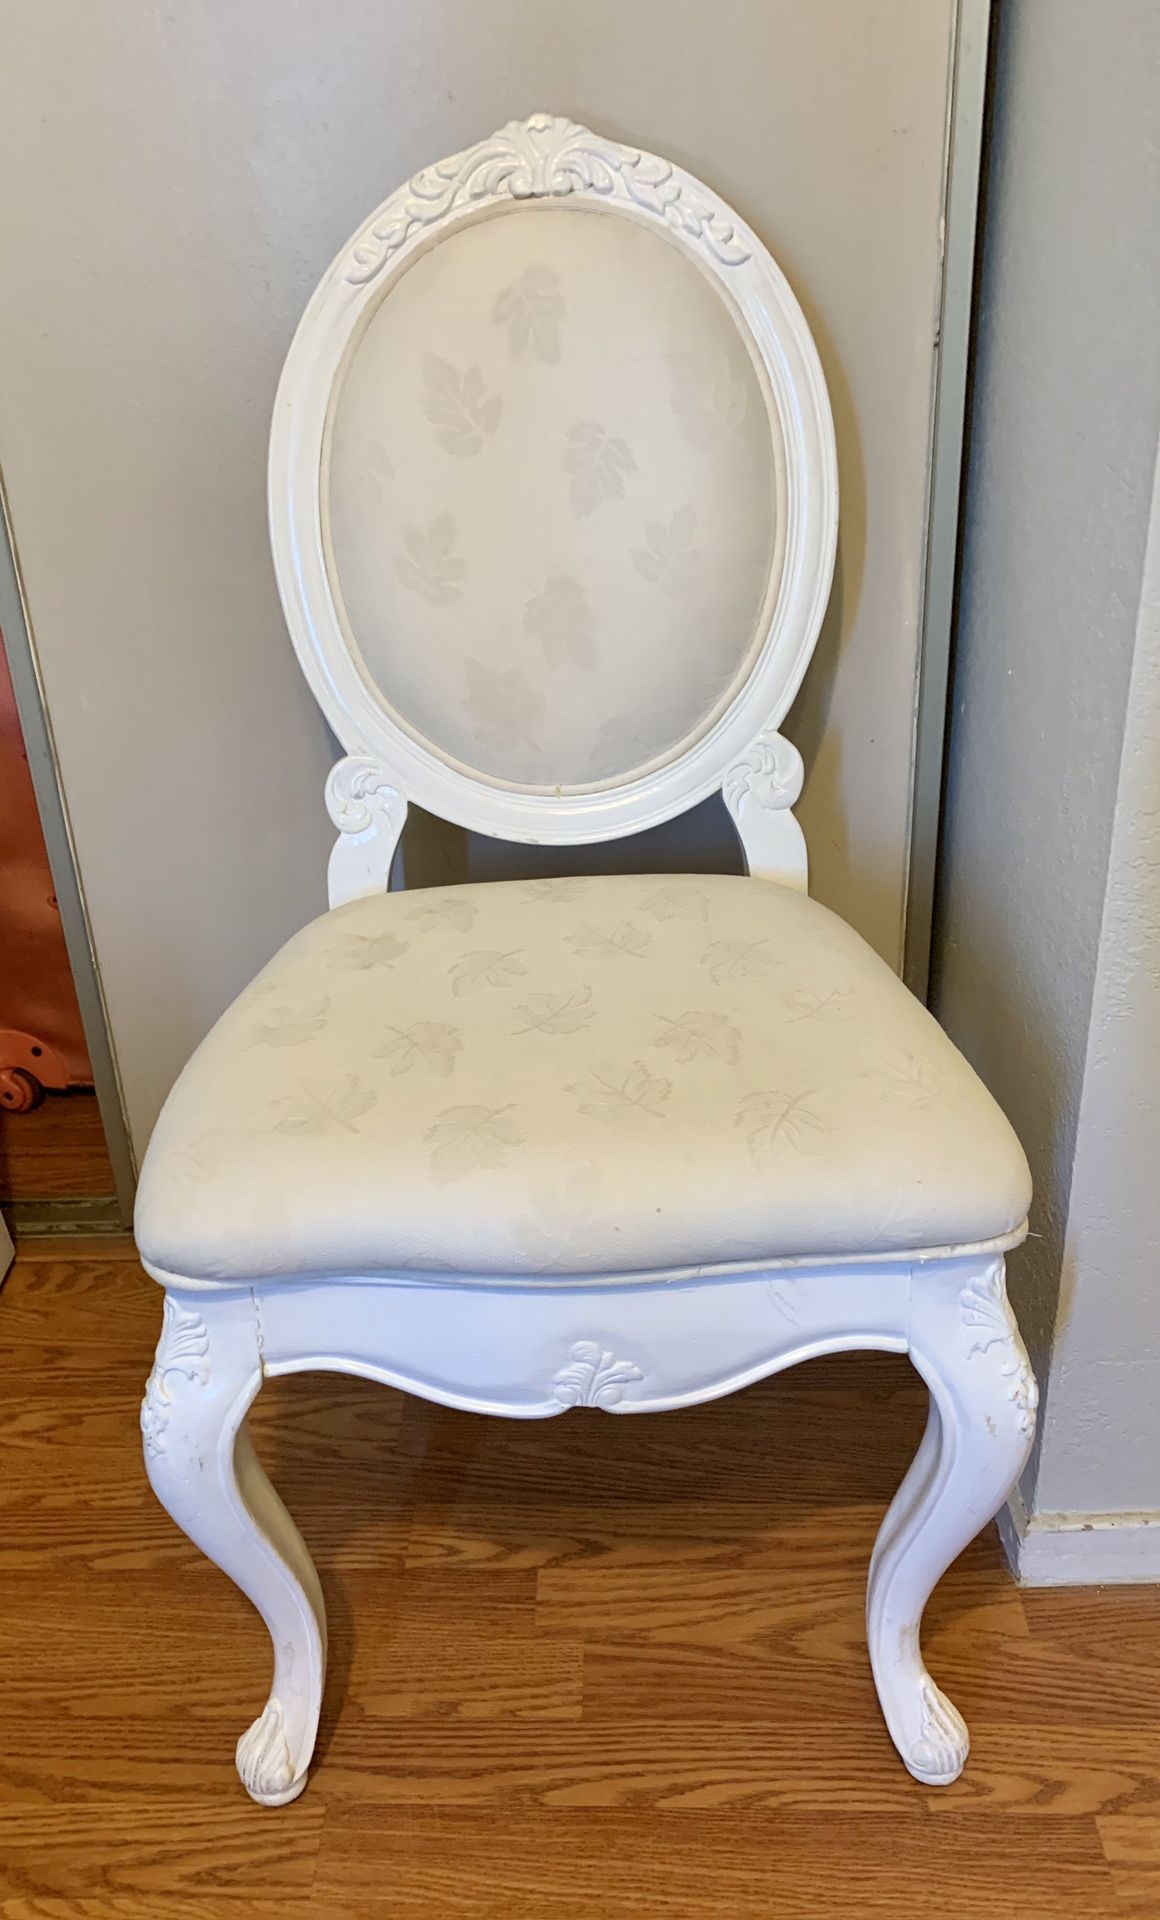 White upholstery wooden chair